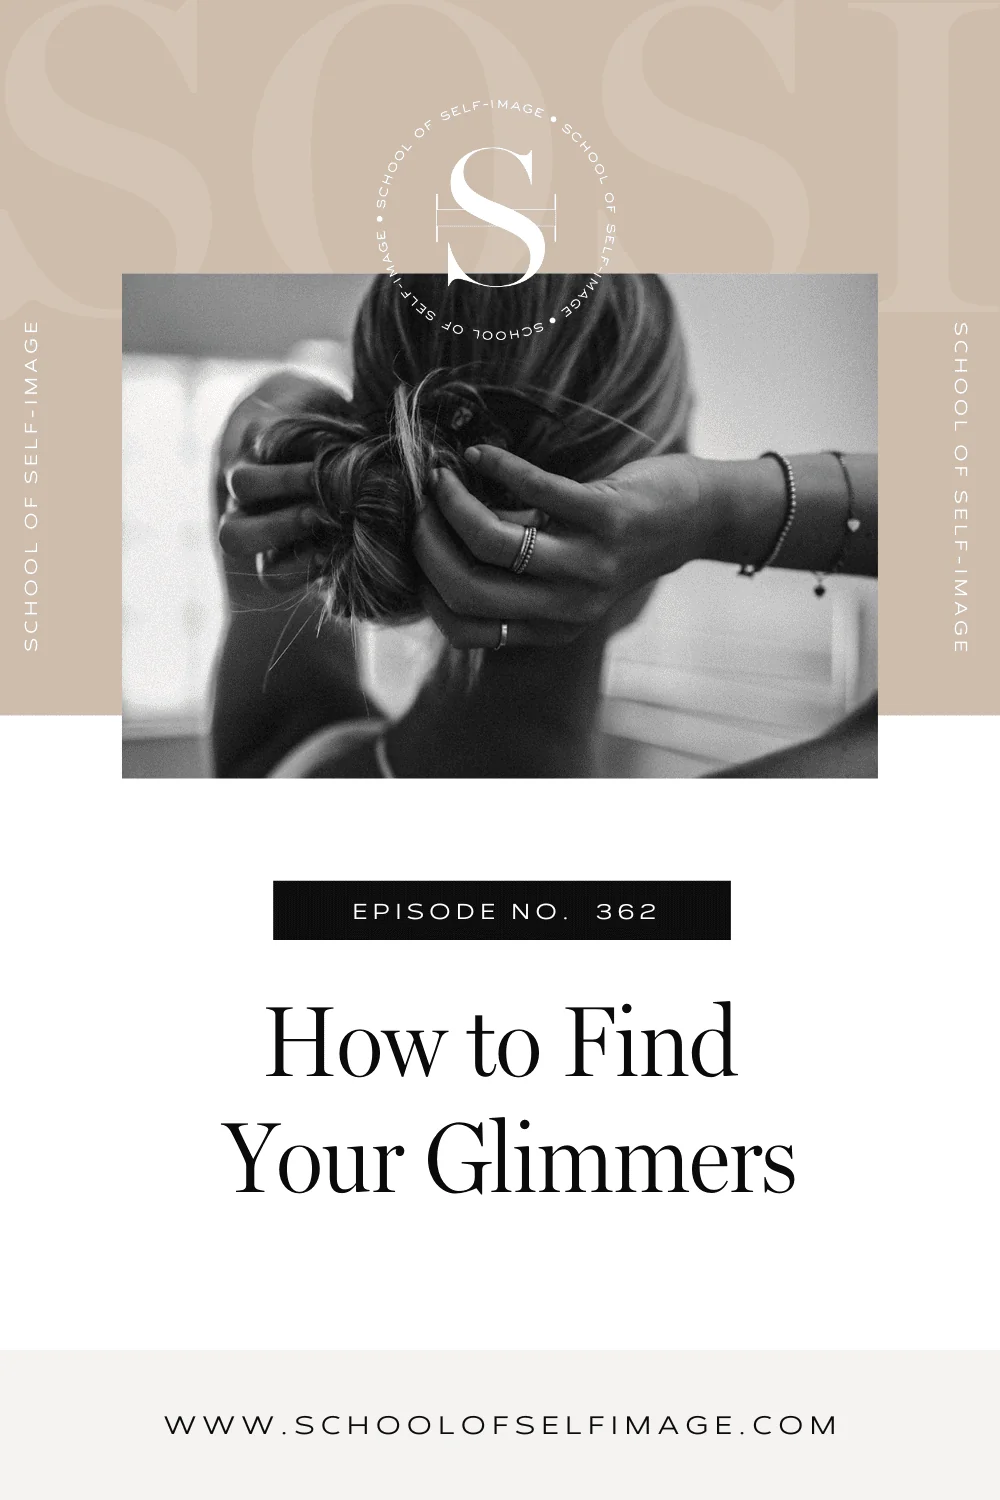 How to Find Your Glimmers